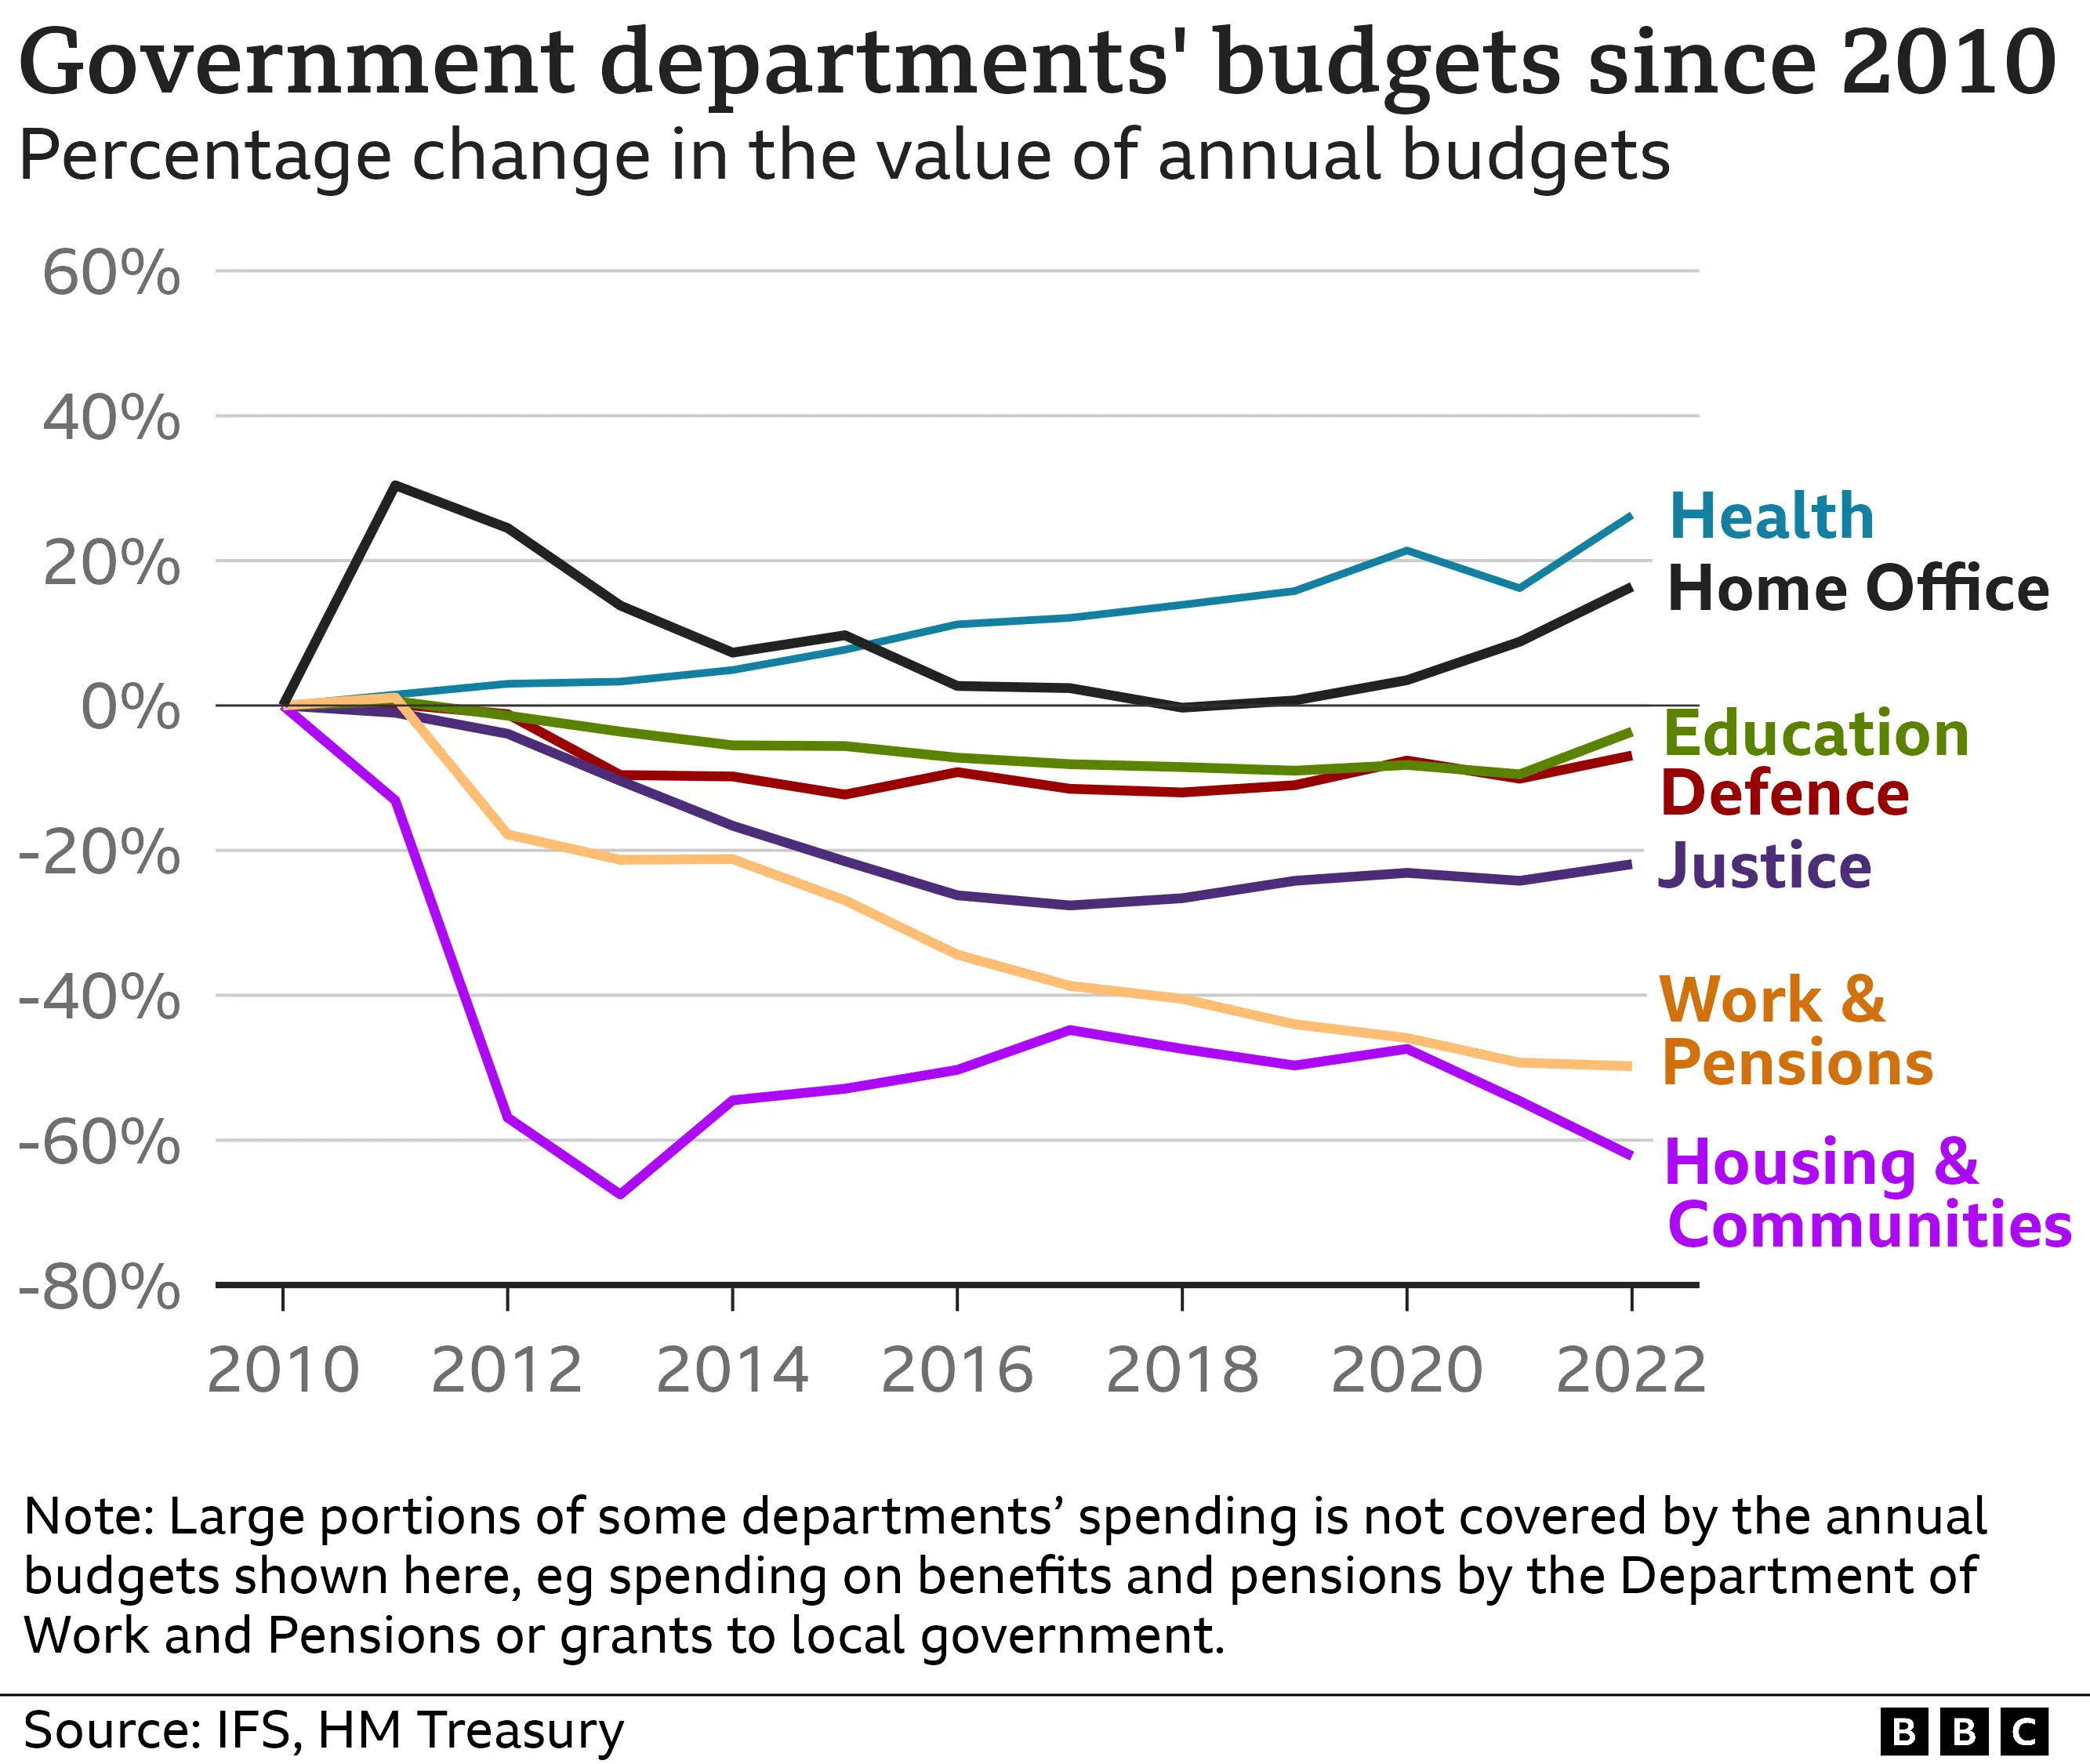 Chart showing the change in government departments' budgets since 2010